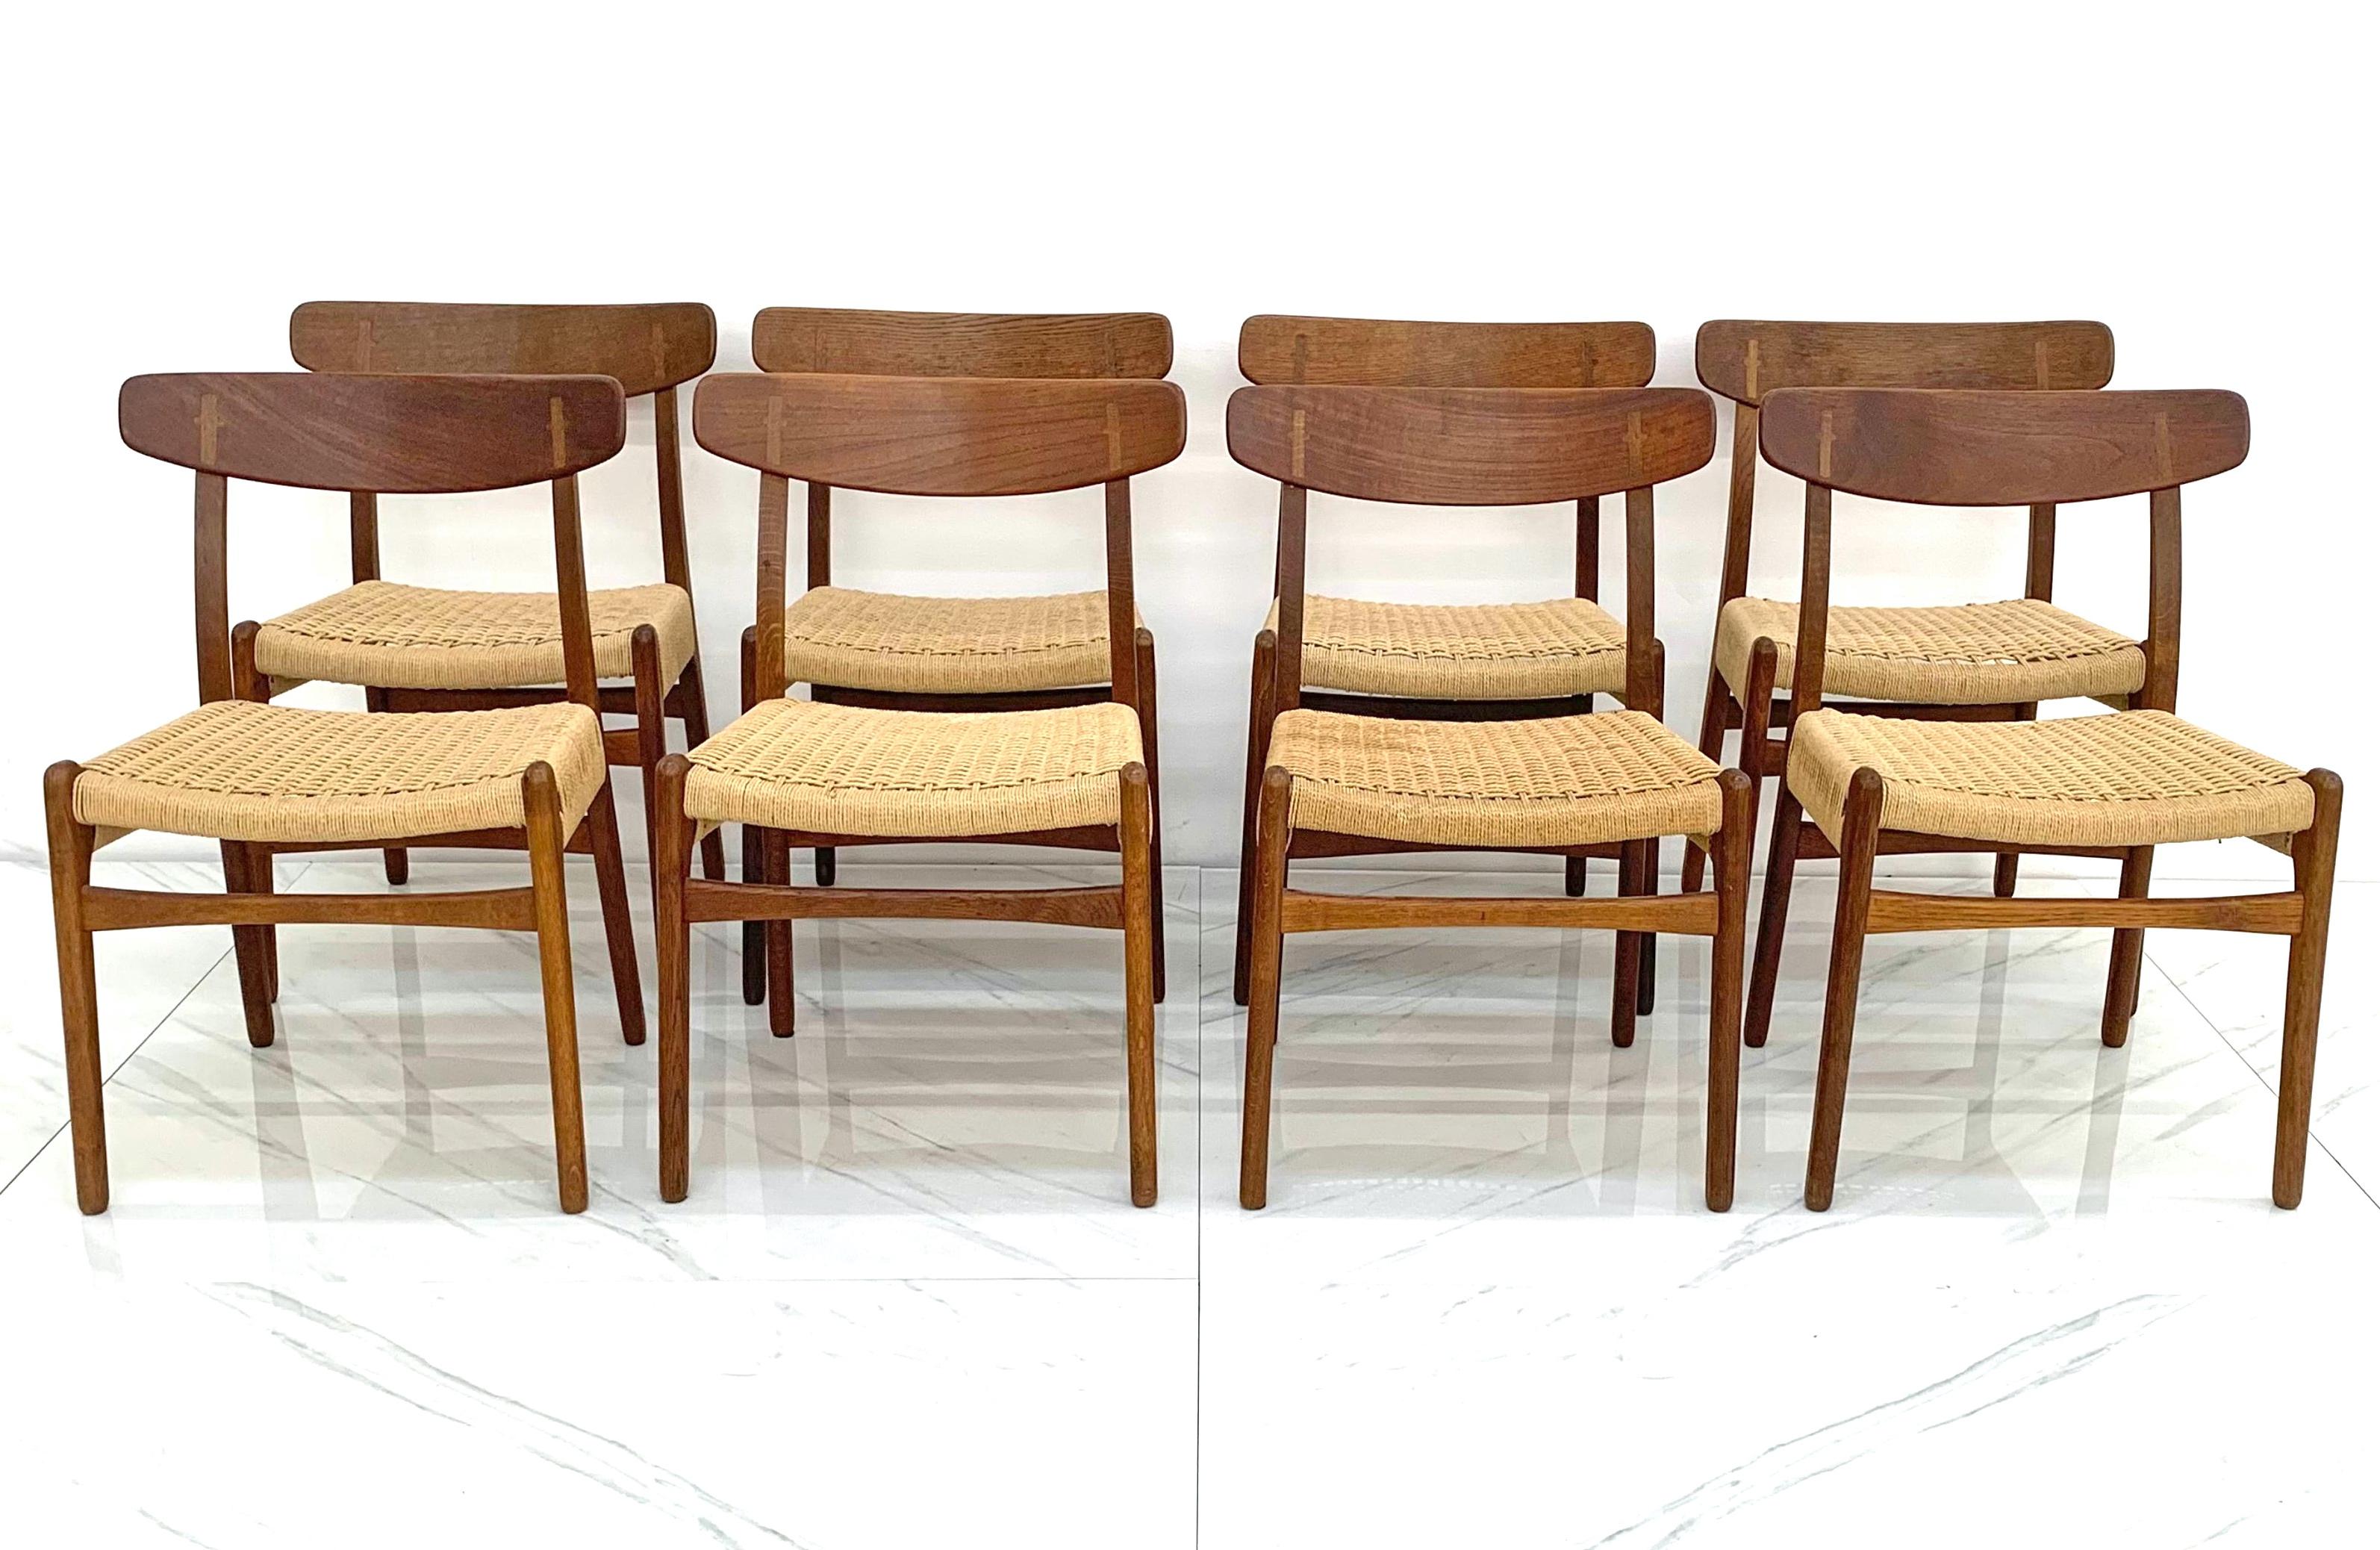 Imagine a world where dining isn't just a meal—it's an enchanting experience. These CH23 dining chairs are your golden ticket to that fantastical realm. Crafted with the kind of artistry that even fairy godmothers would envy, these chairs are like a